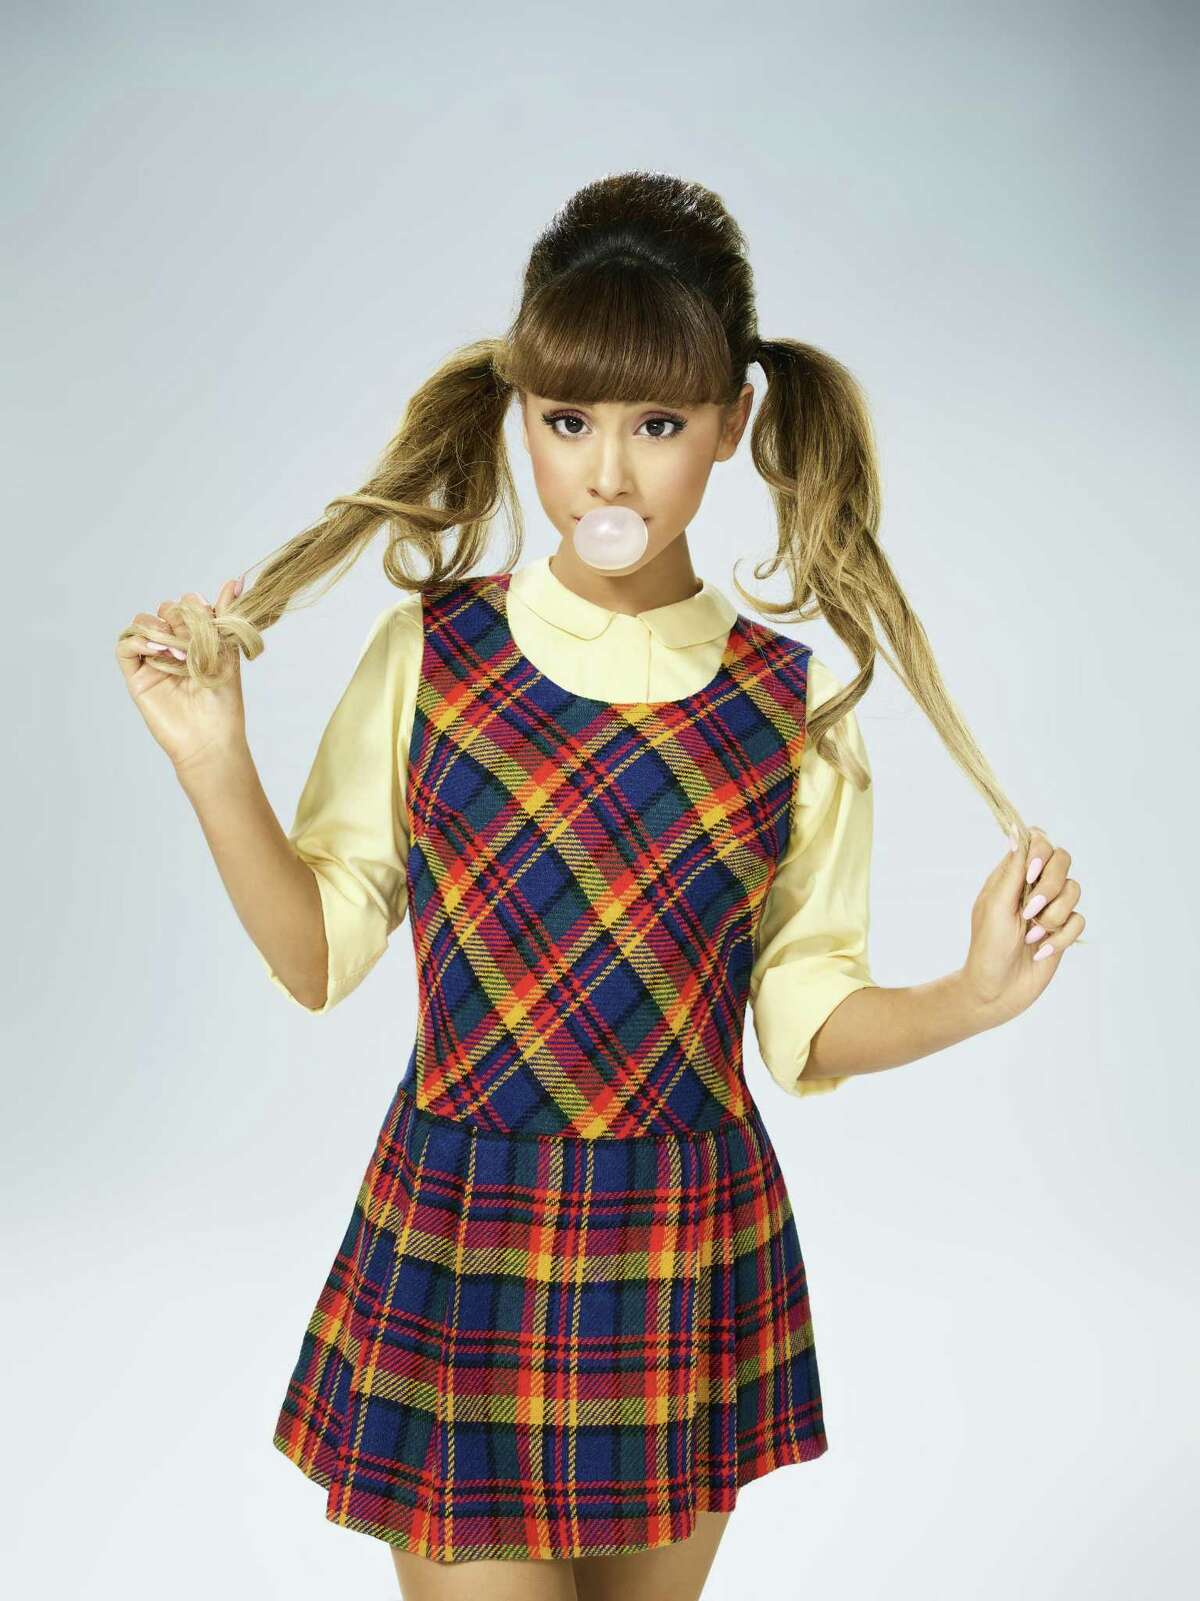 Grande was one of the stars of NBC’s live production of “Hairspray.”